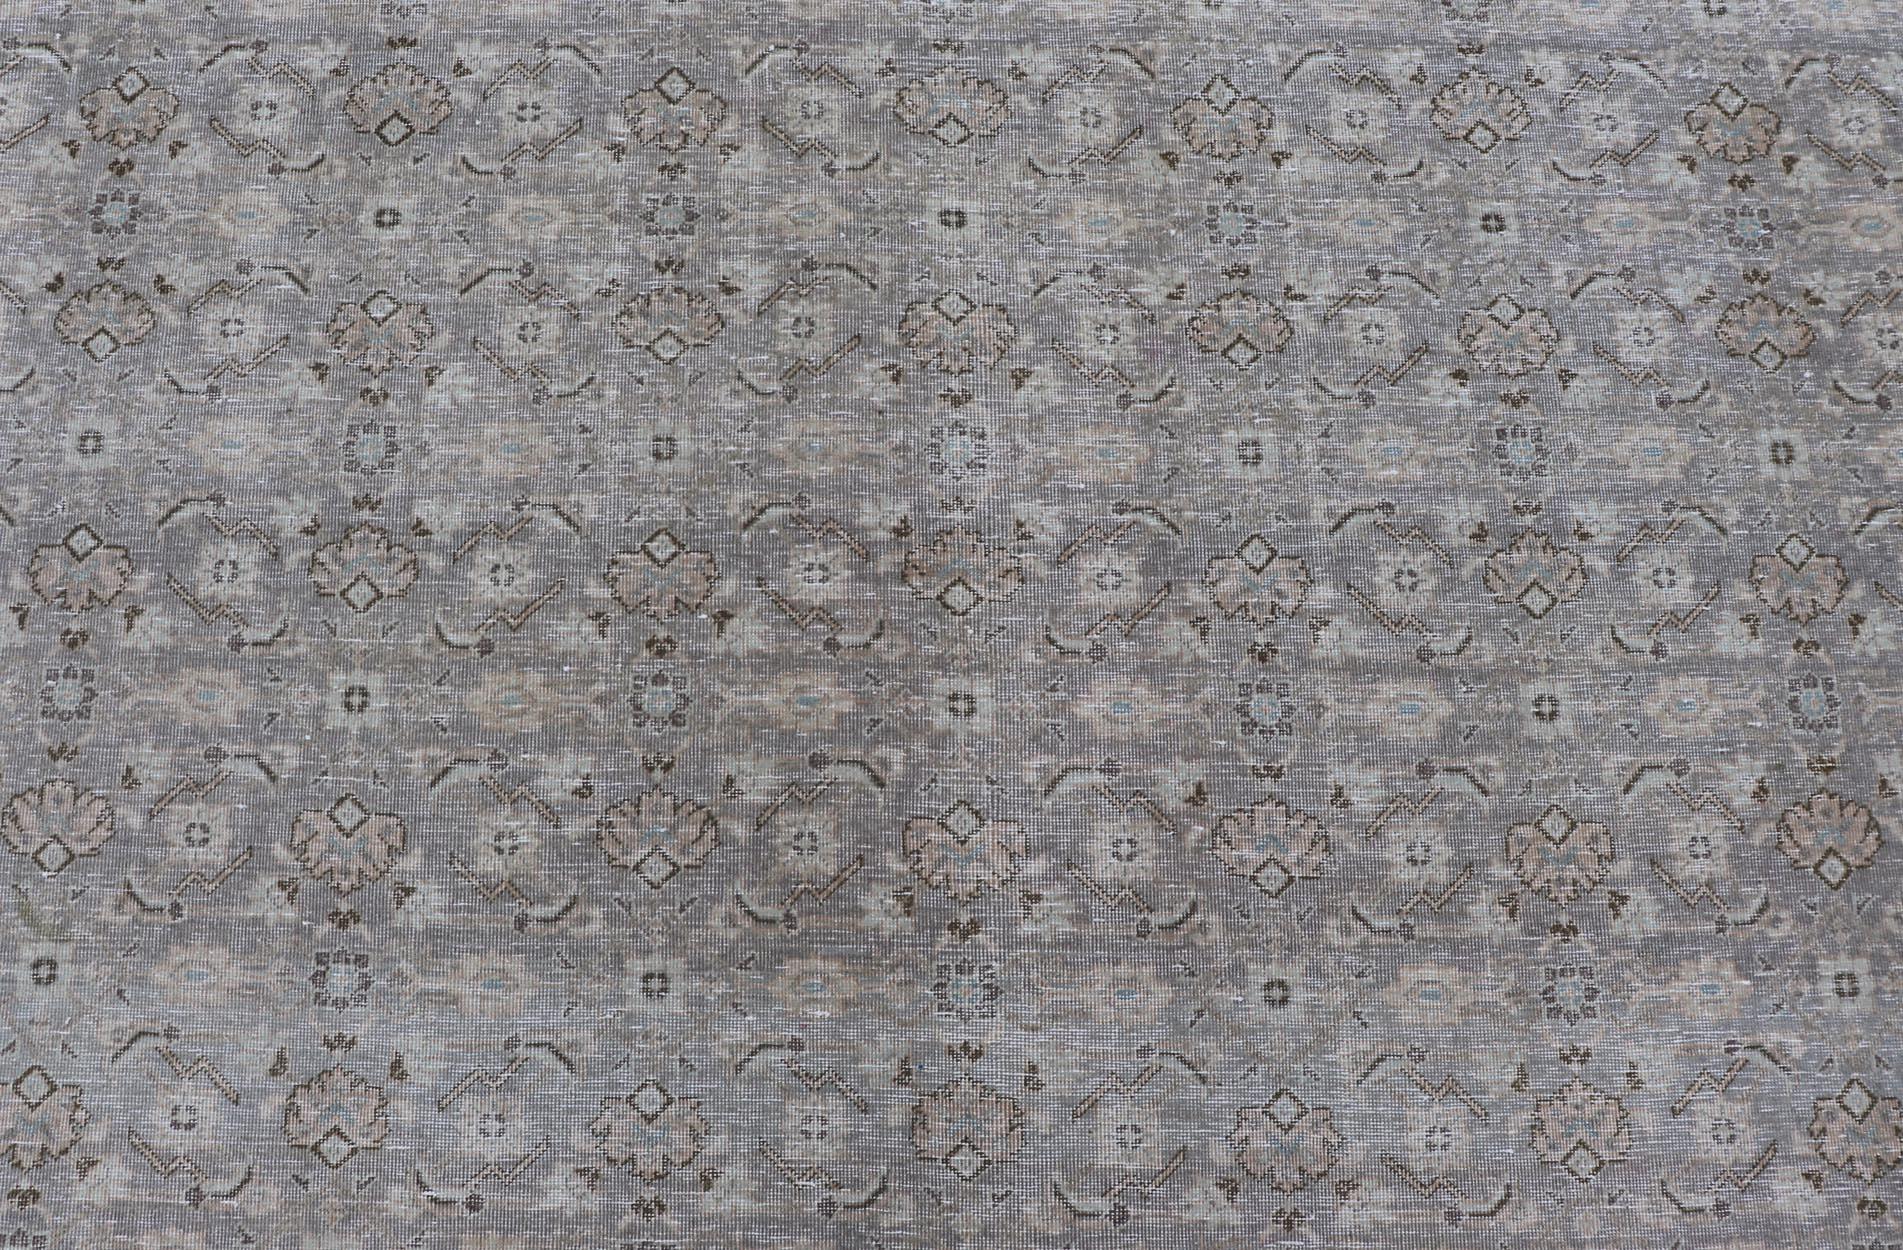 Antique Persian Tabriz Rug in All-Over Herati in Shades of Lavender and Tan  For Sale 6